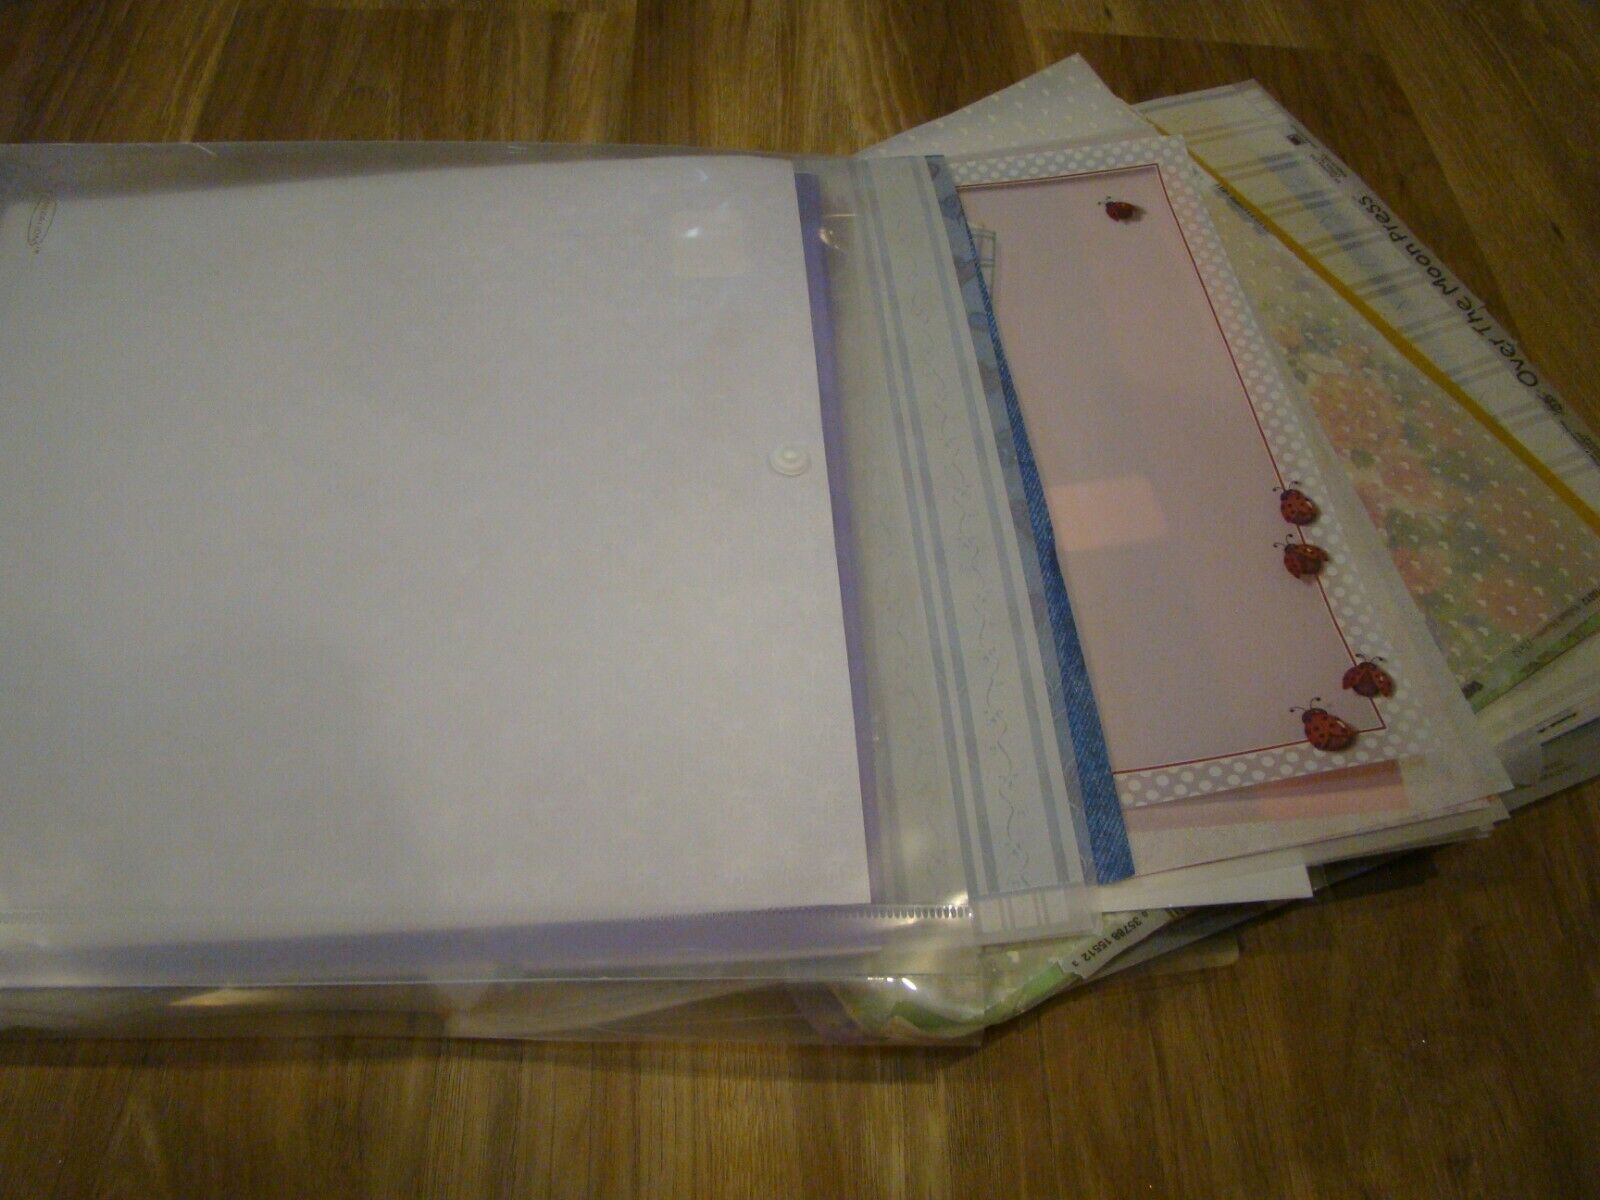 Over 100 Sheets 5+ Pounds Of Scrapbooking Paper - Vellum & Mulberry